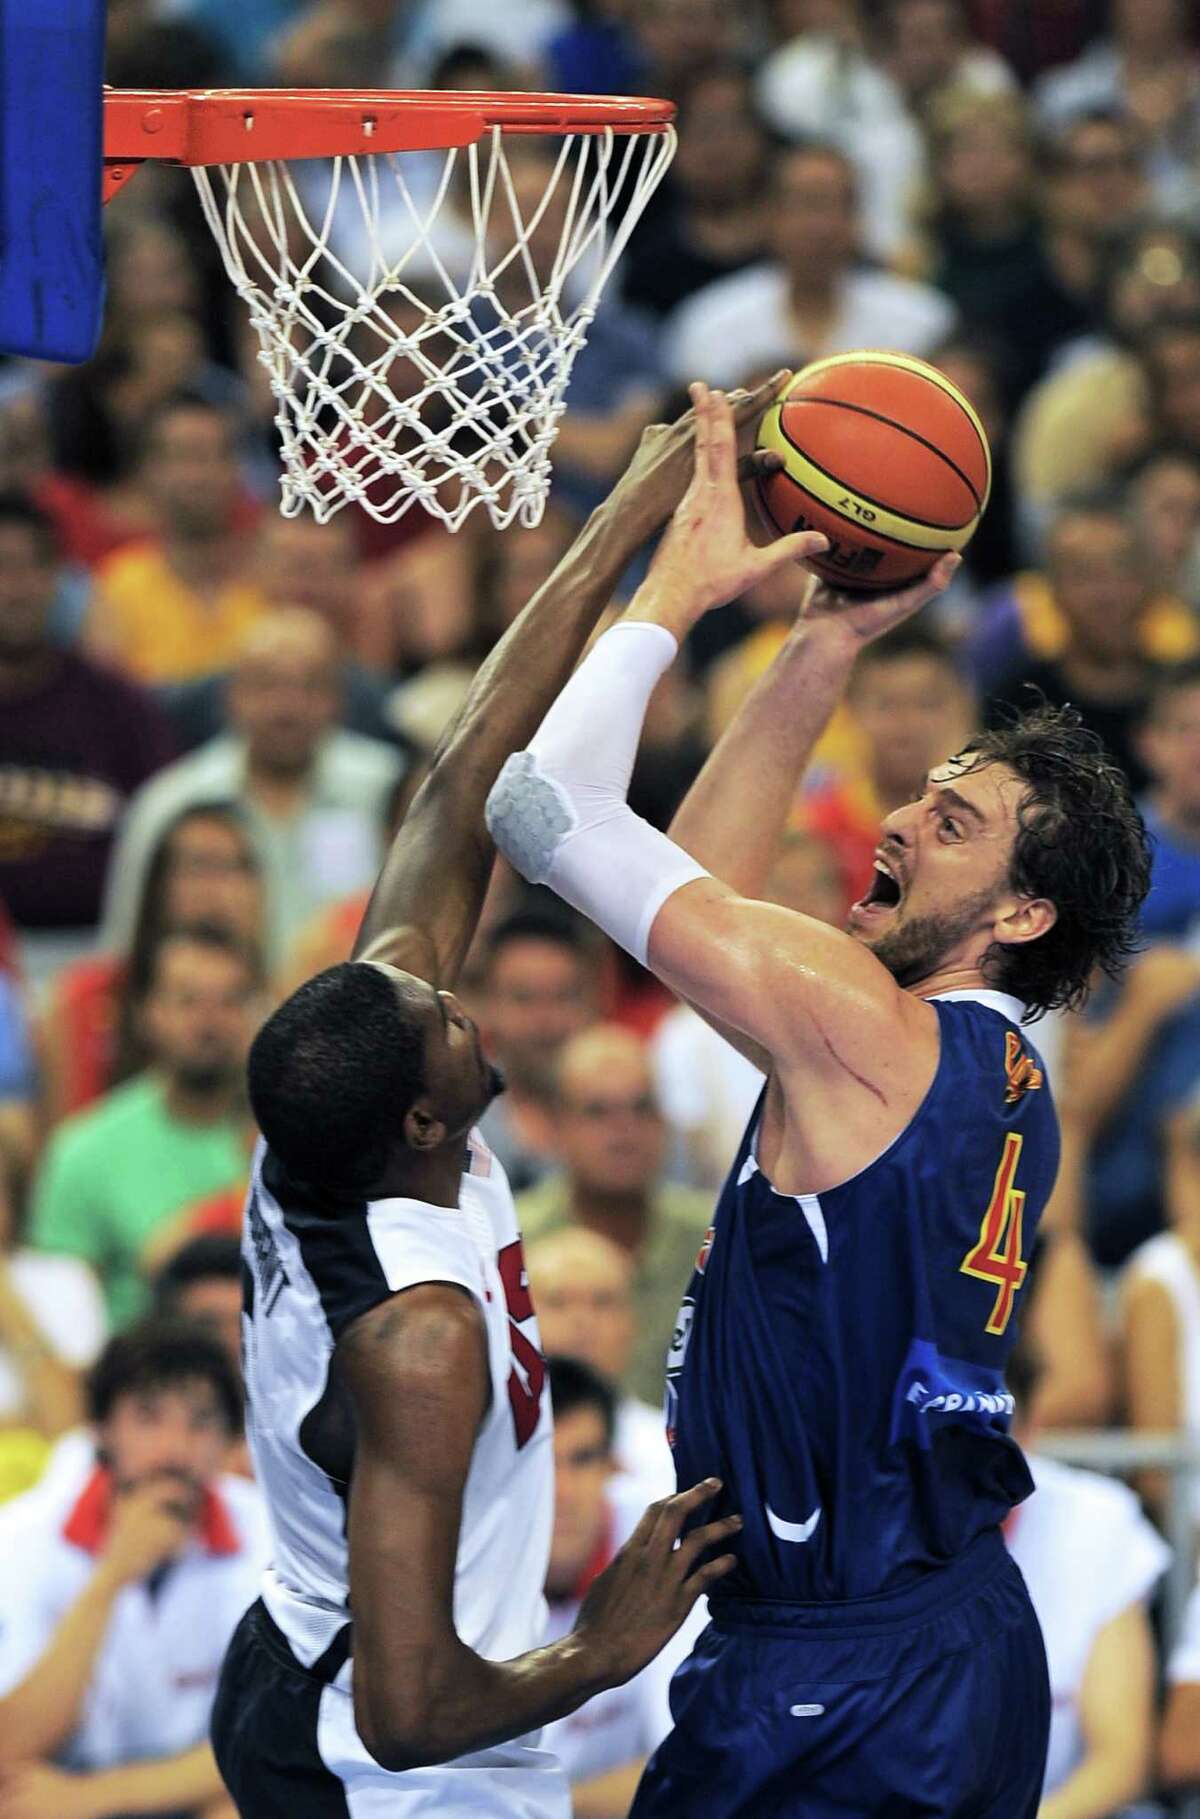 Spain's Pau Gasol (R) vies with Kevin Durant (L) during the Pre-Olympic friendly basketball match between Spain and USA at Palau Sant Jordi in Barcelona on July 24, 2012. AFP PHOTO / LLUIS GENELLUIS GENE/AFP/GettyImages